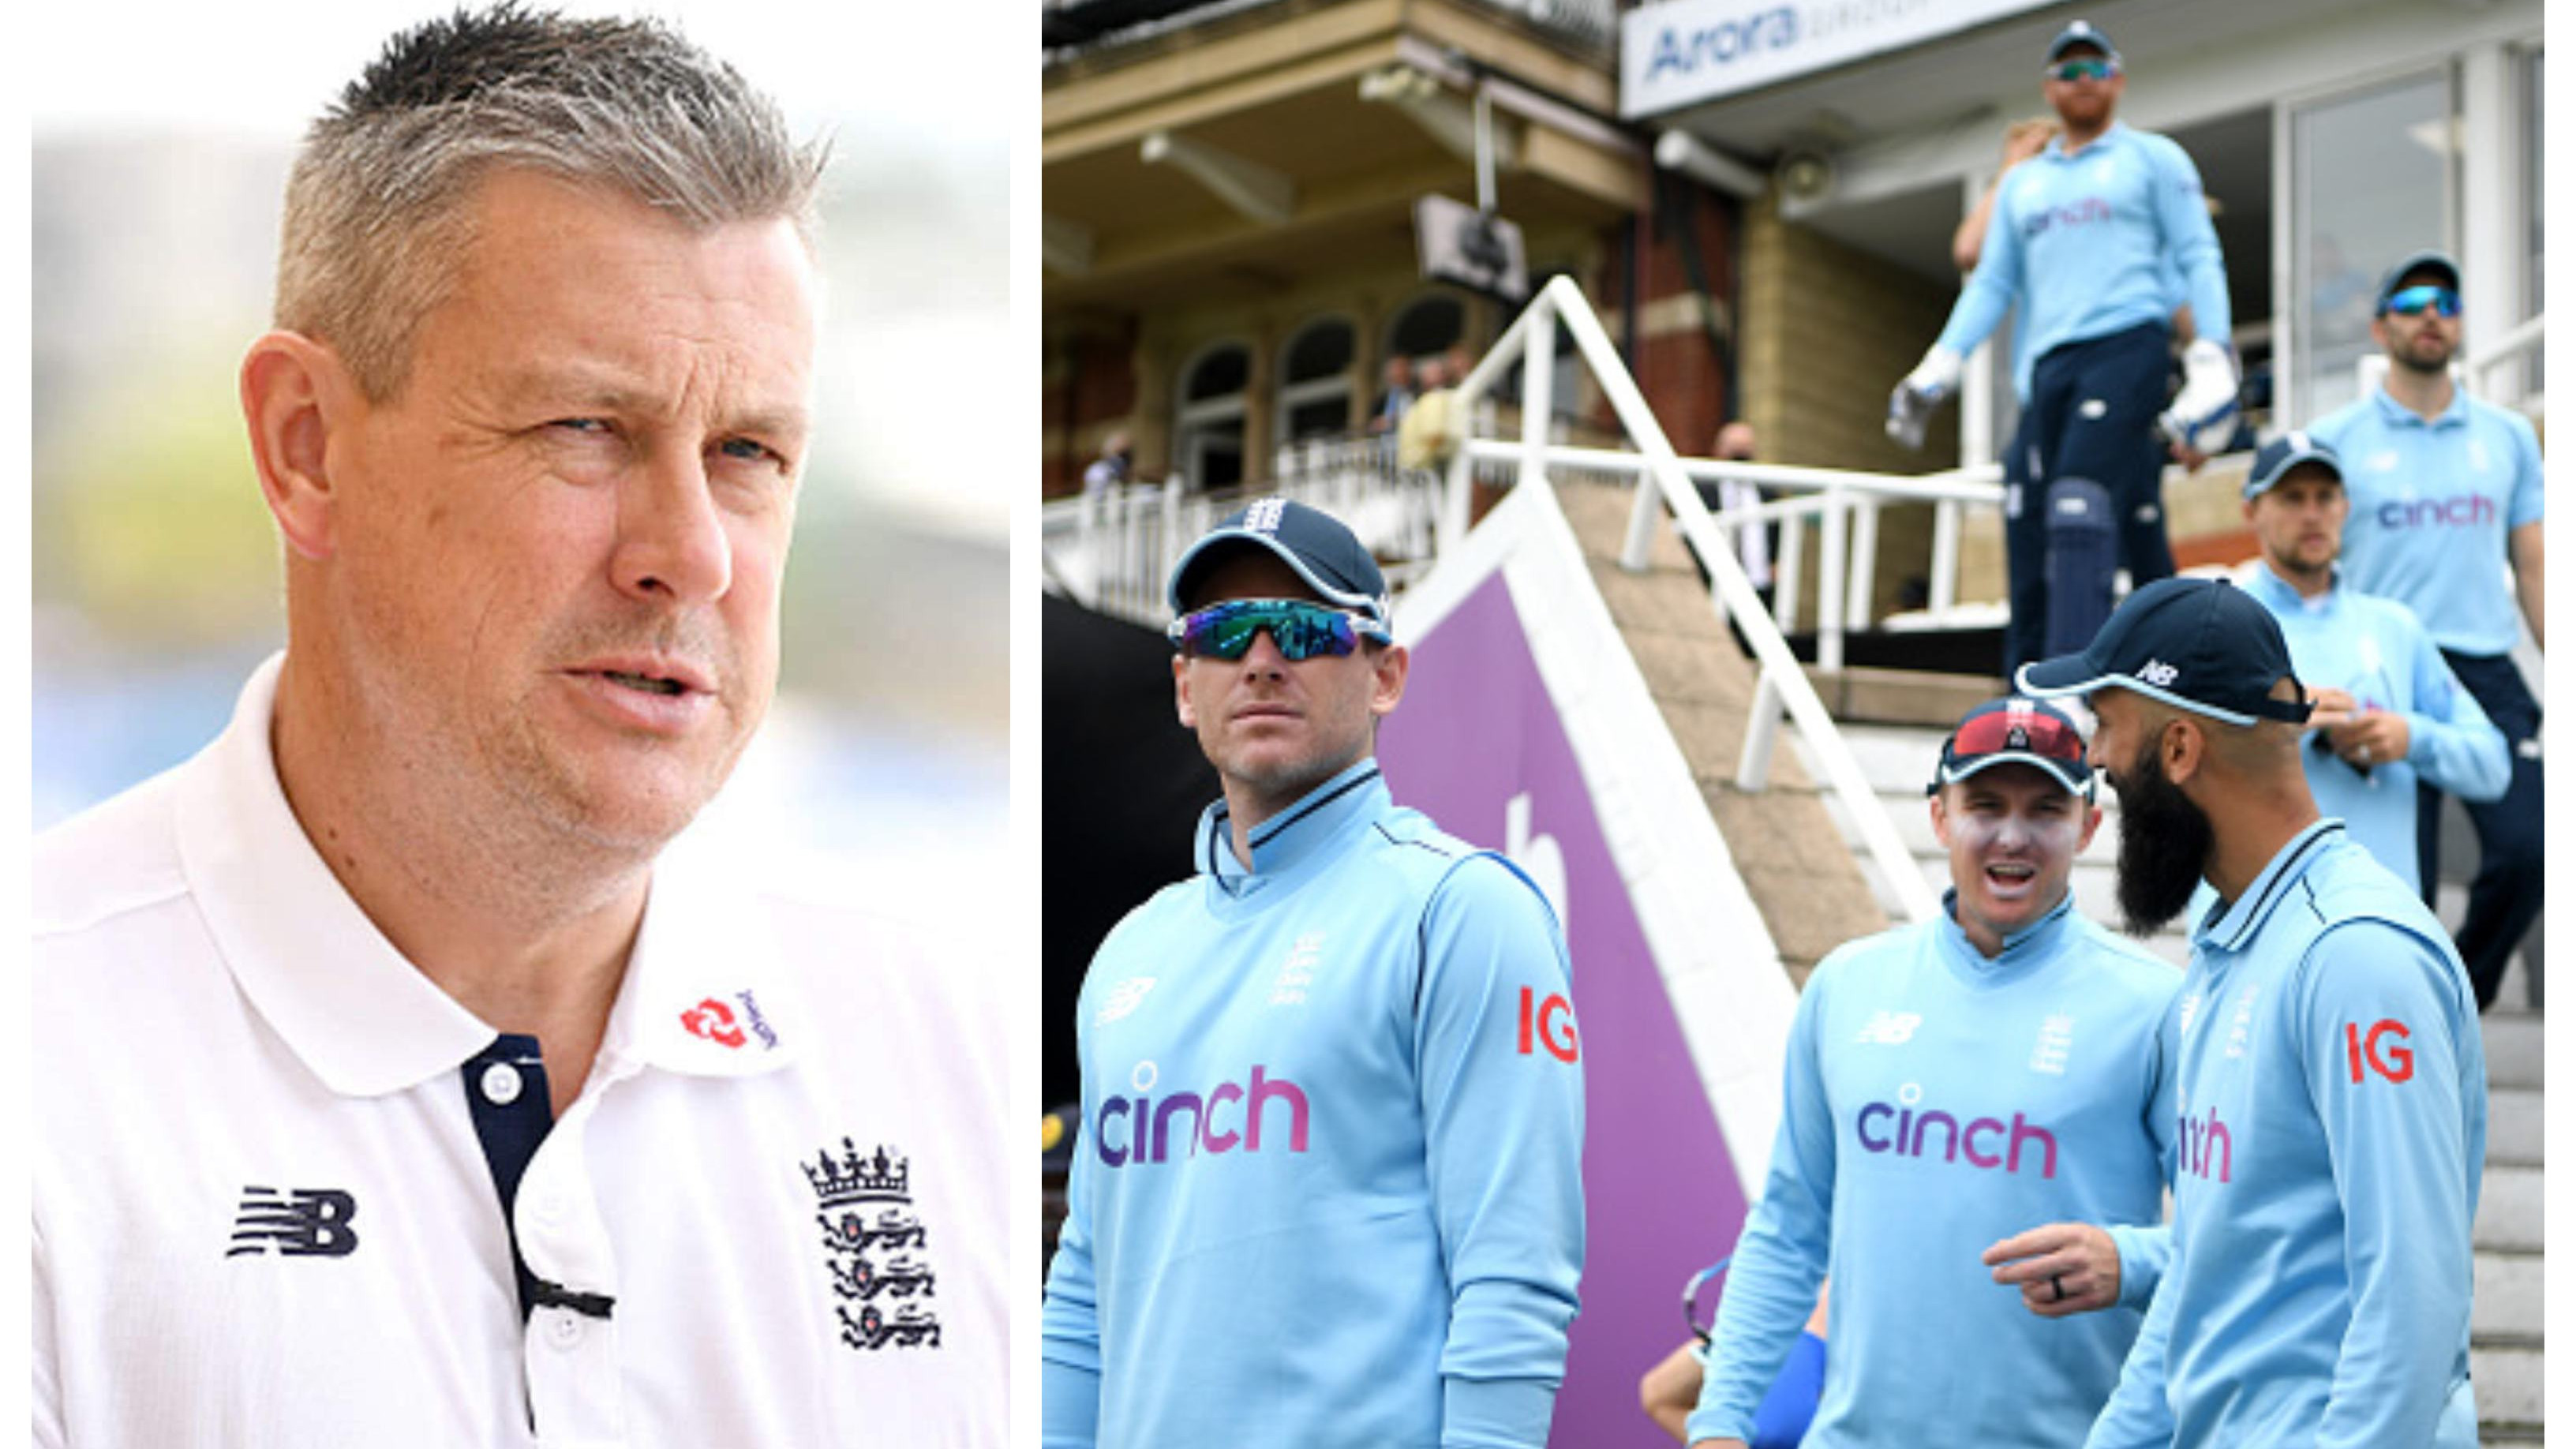 ENG v PAK 2021: Confident that England players haven't violated any COVID-19 protocols, says Ashley Giles